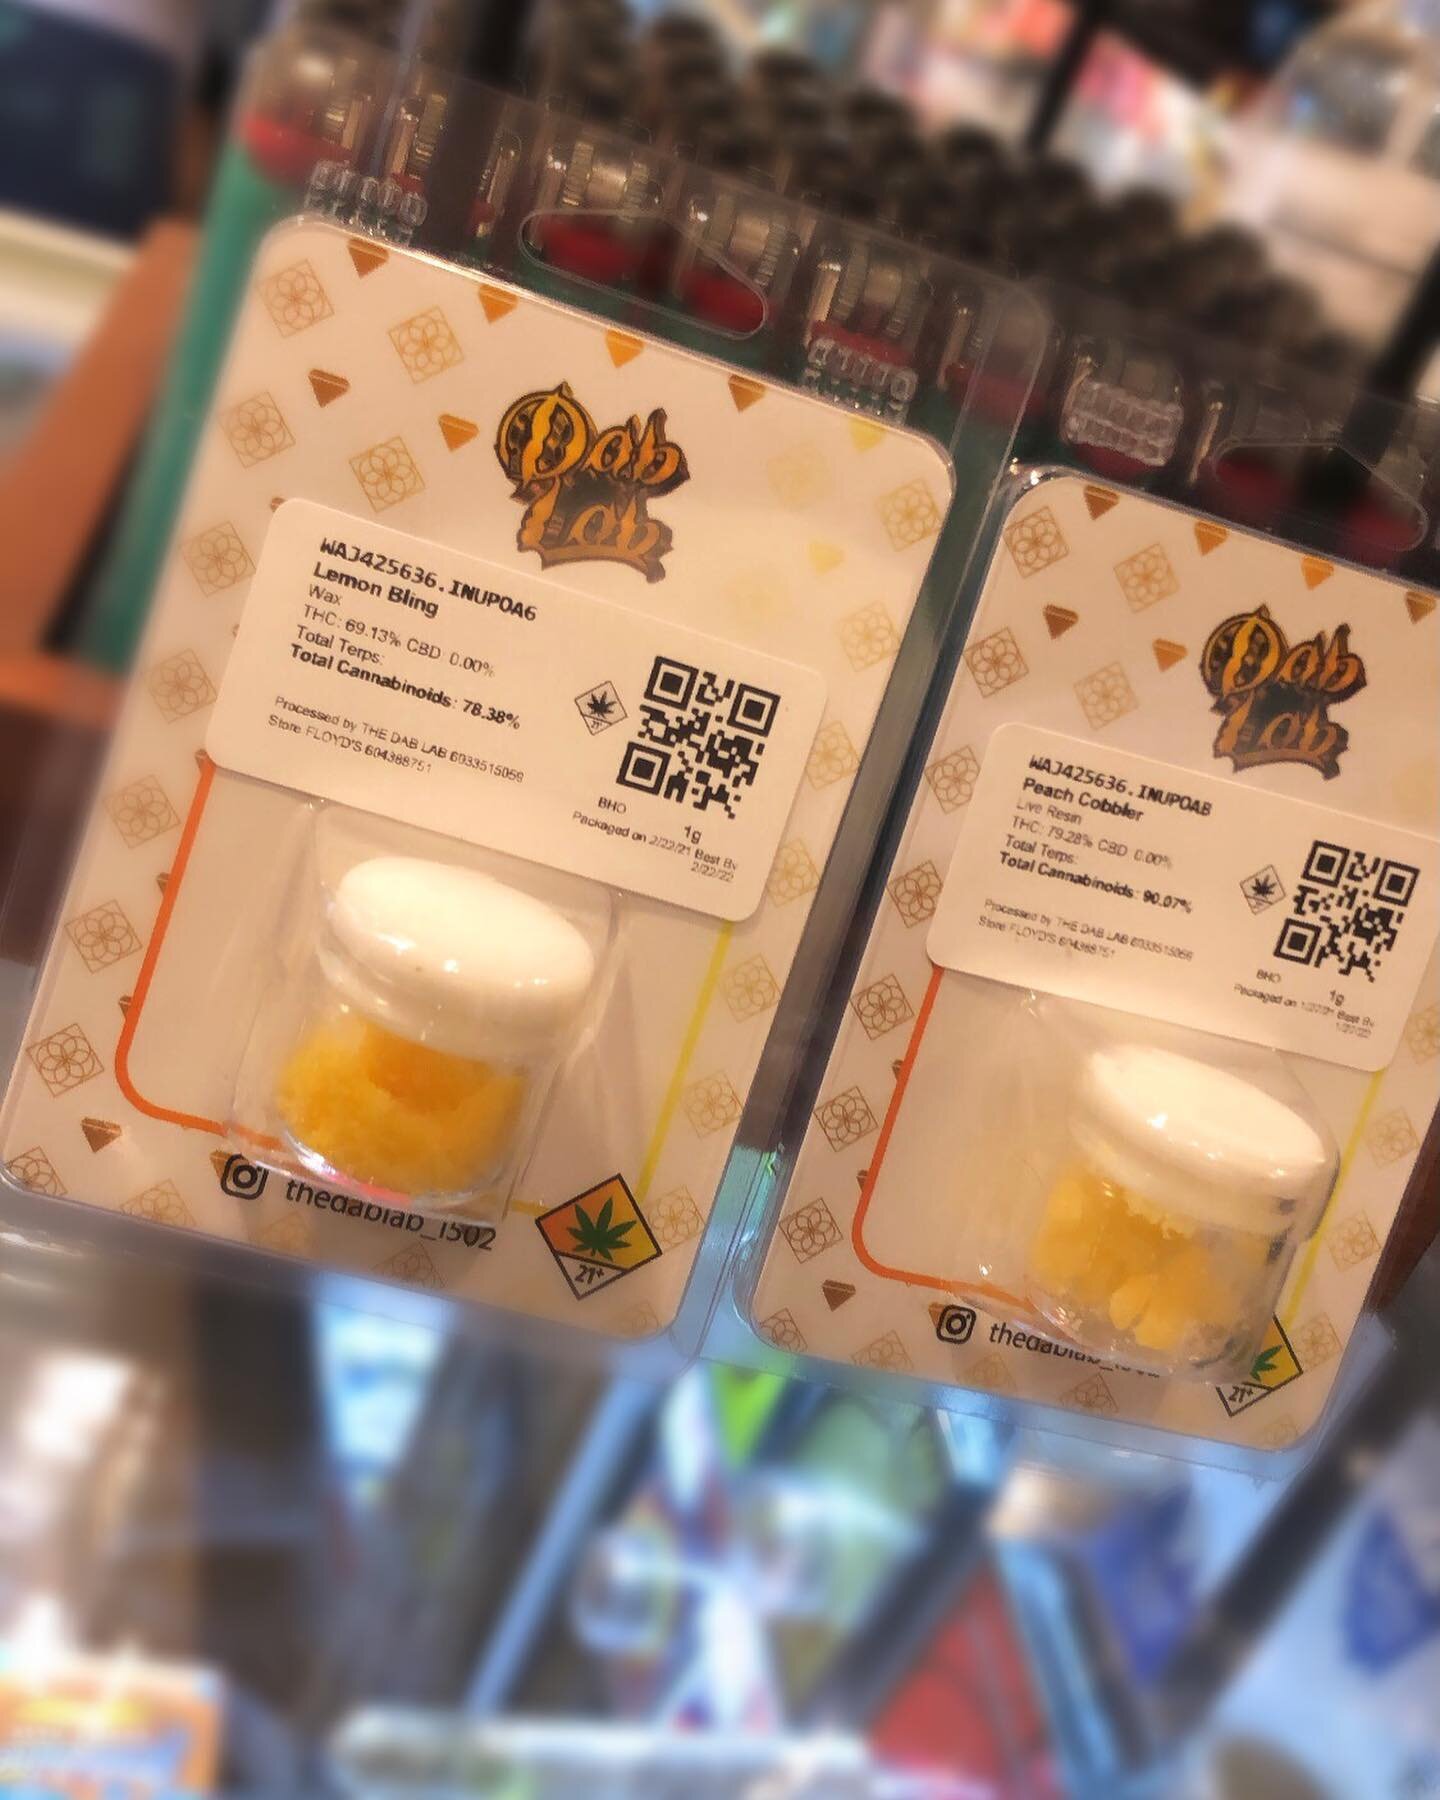 Danggg... now that is some fire concentrates!🔥🔥
&bull;
@thedablab_i502 is finally back! We have a huge fresh drop from them just waiting for you! 
From Jungle Mintz to Lemon Bling, we have tons of amazing strains to choose from!😍
&bull;
So come #s